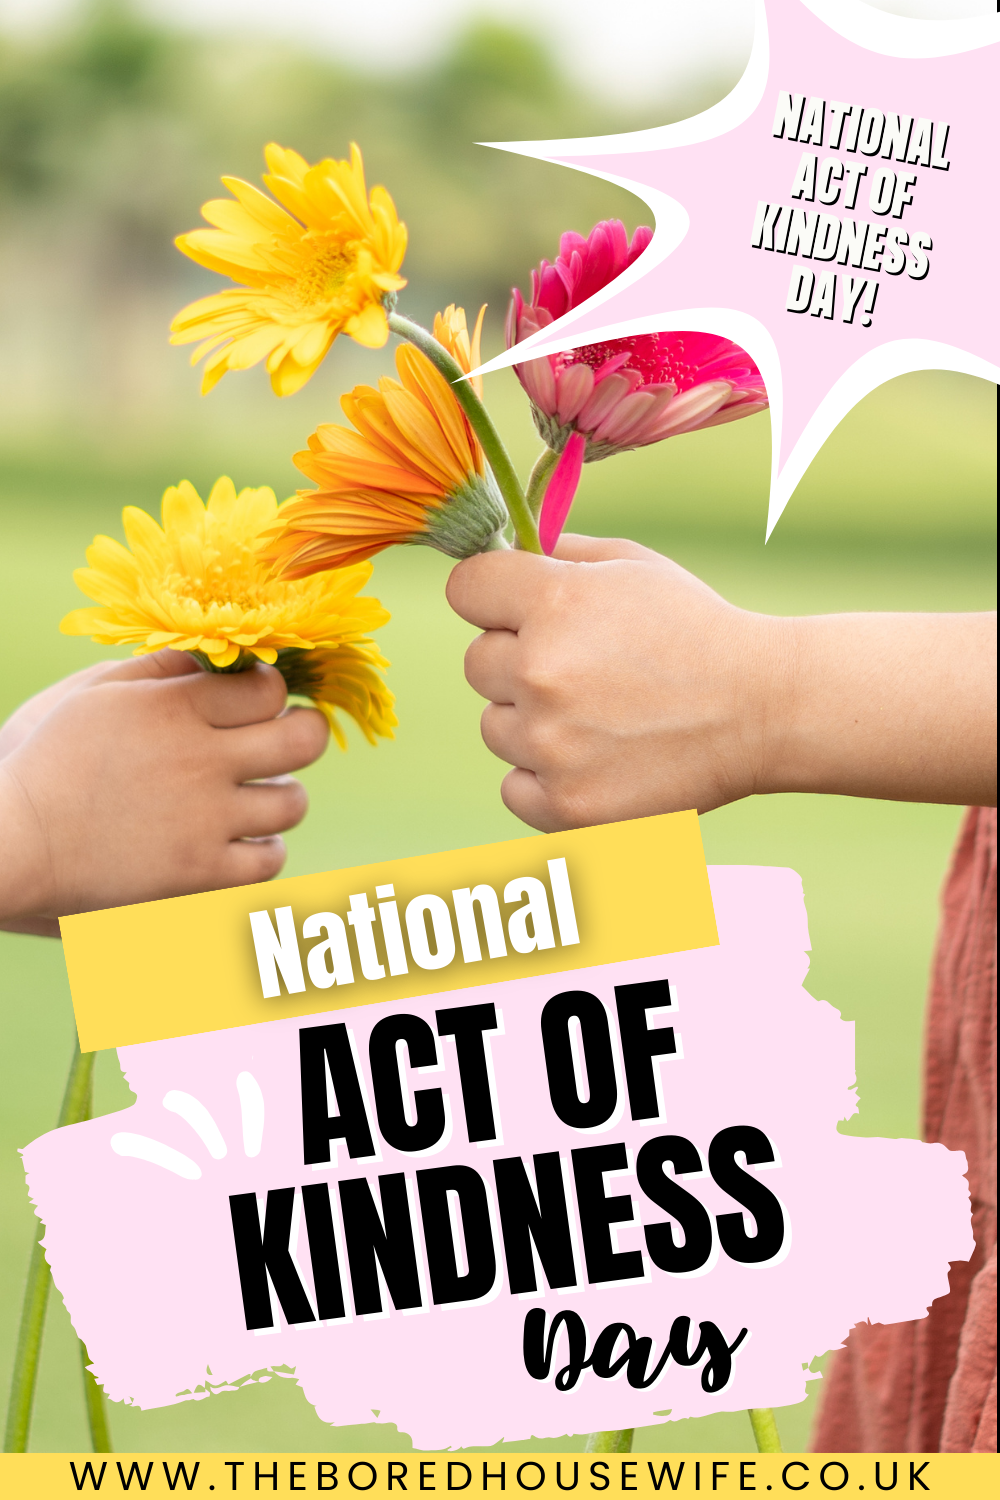 National Random Act Of Kindness Day